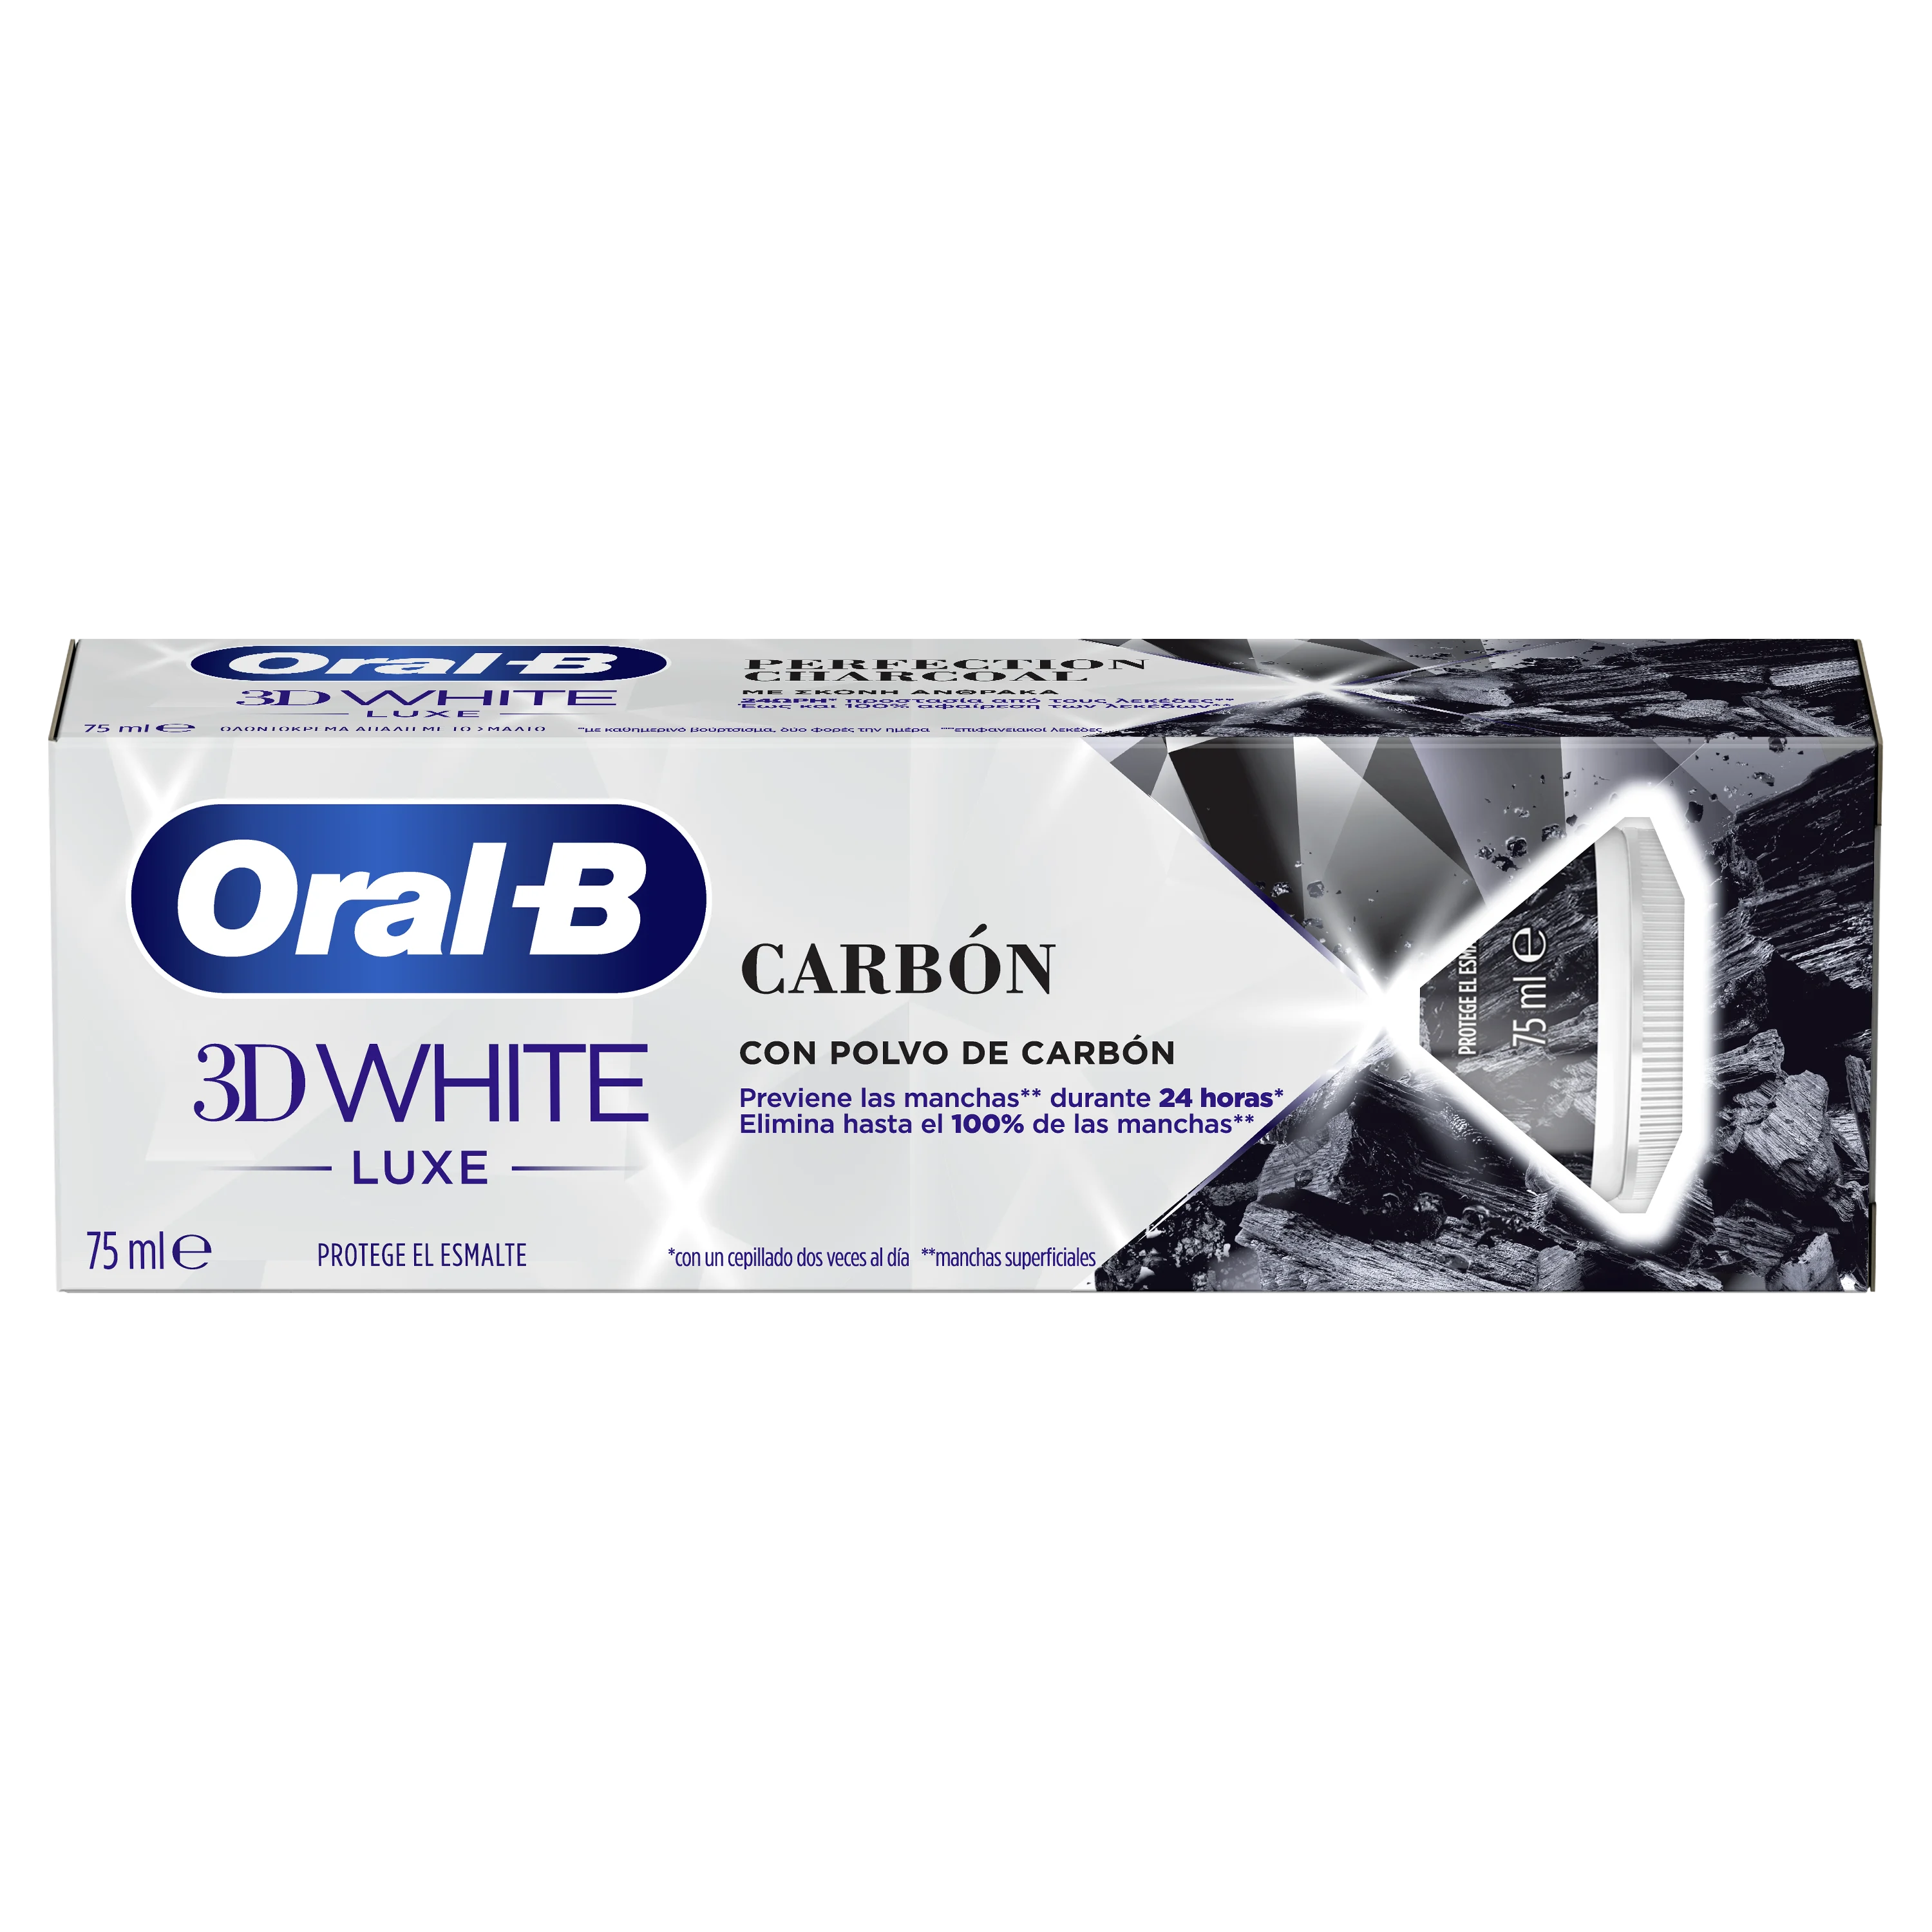 Oral-B 3D White Luxe Carbón Pasta Dentífrica undefined